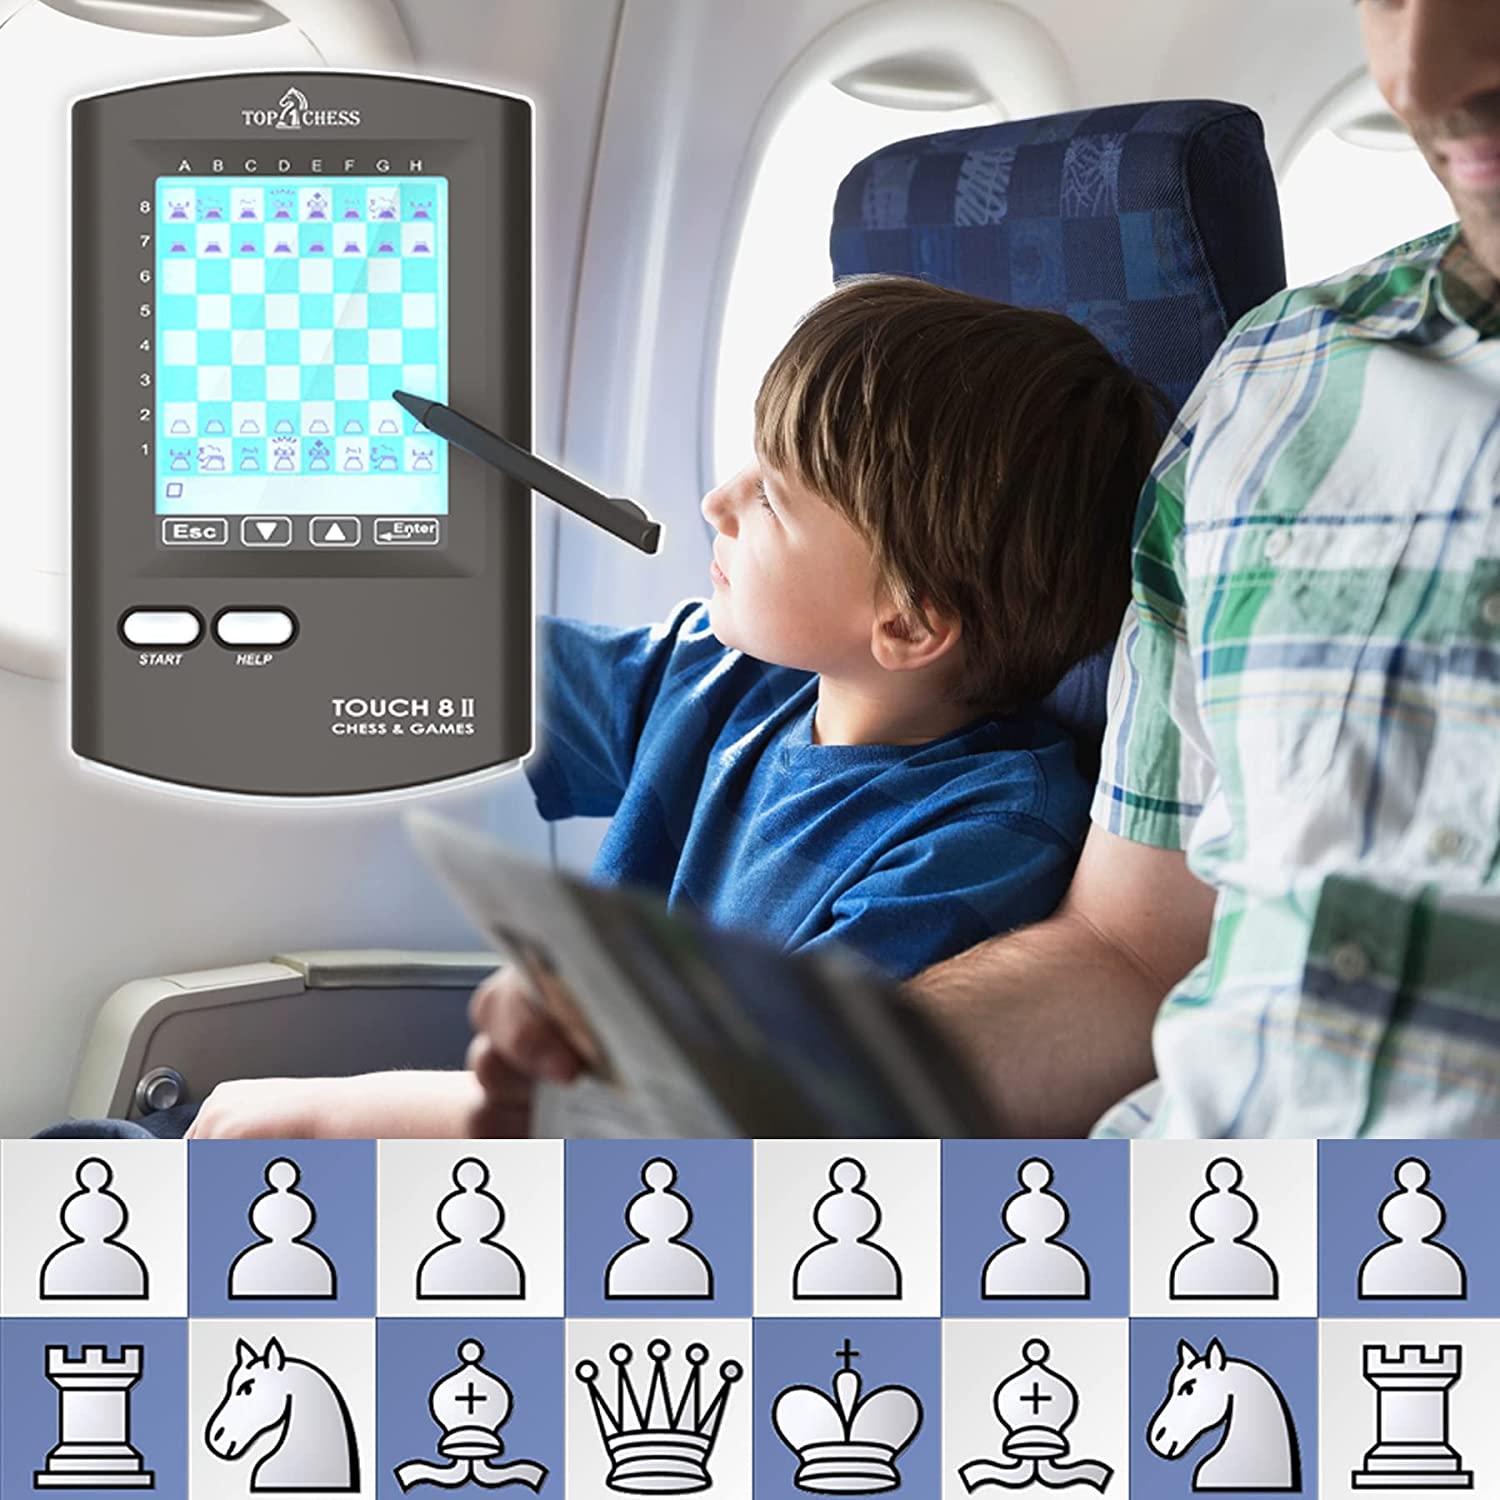 Top 1 Chess Mini Touch Electronic Chess Game, Strategy Games Computer Portable Travel Chess